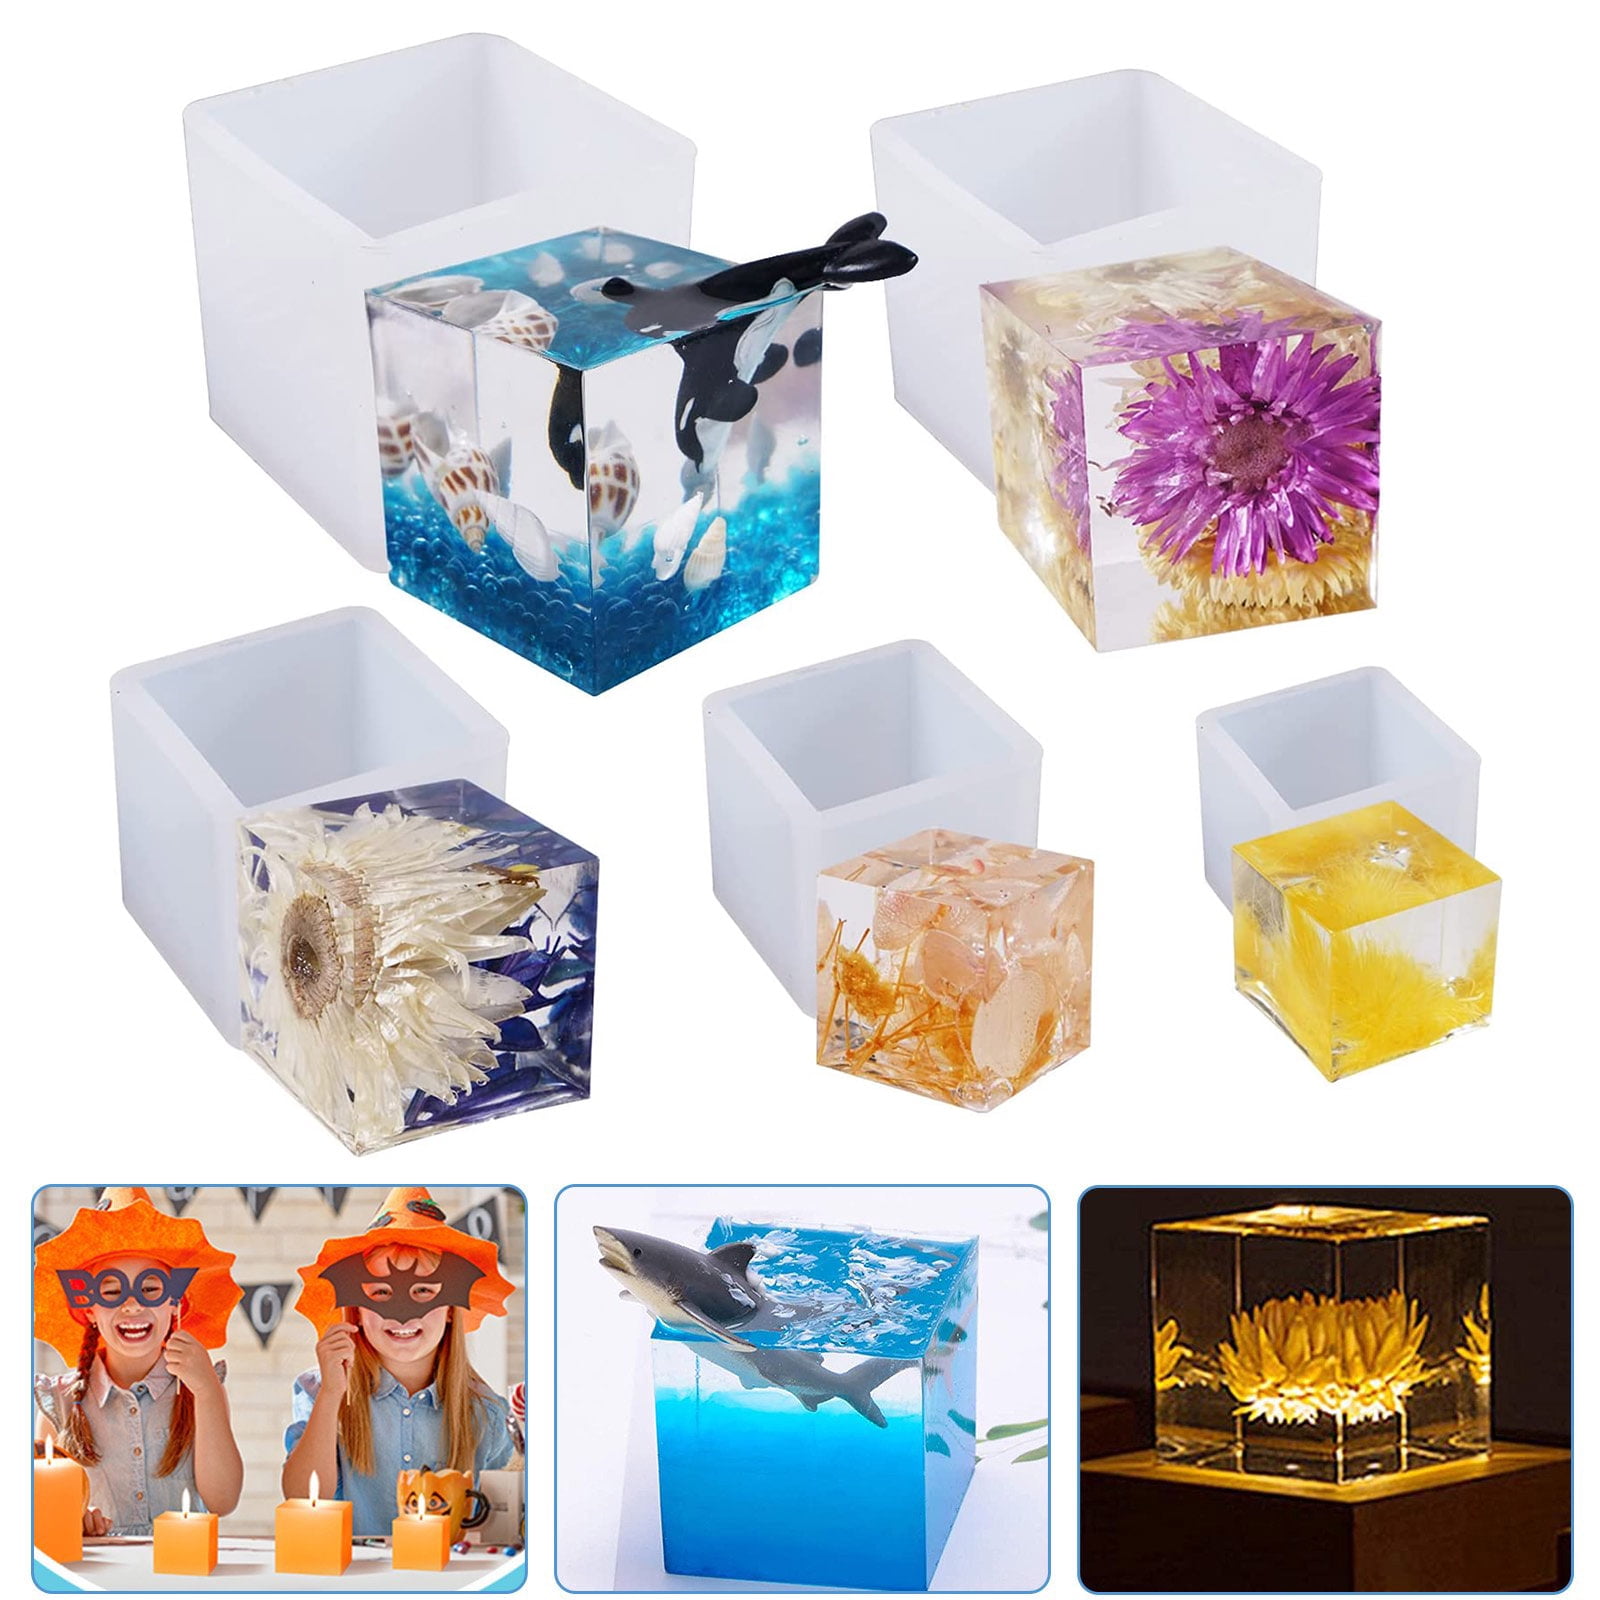 Cuboid Cube Resin Mold Crystal Epoxy Silicone Mold DIY Jewelry